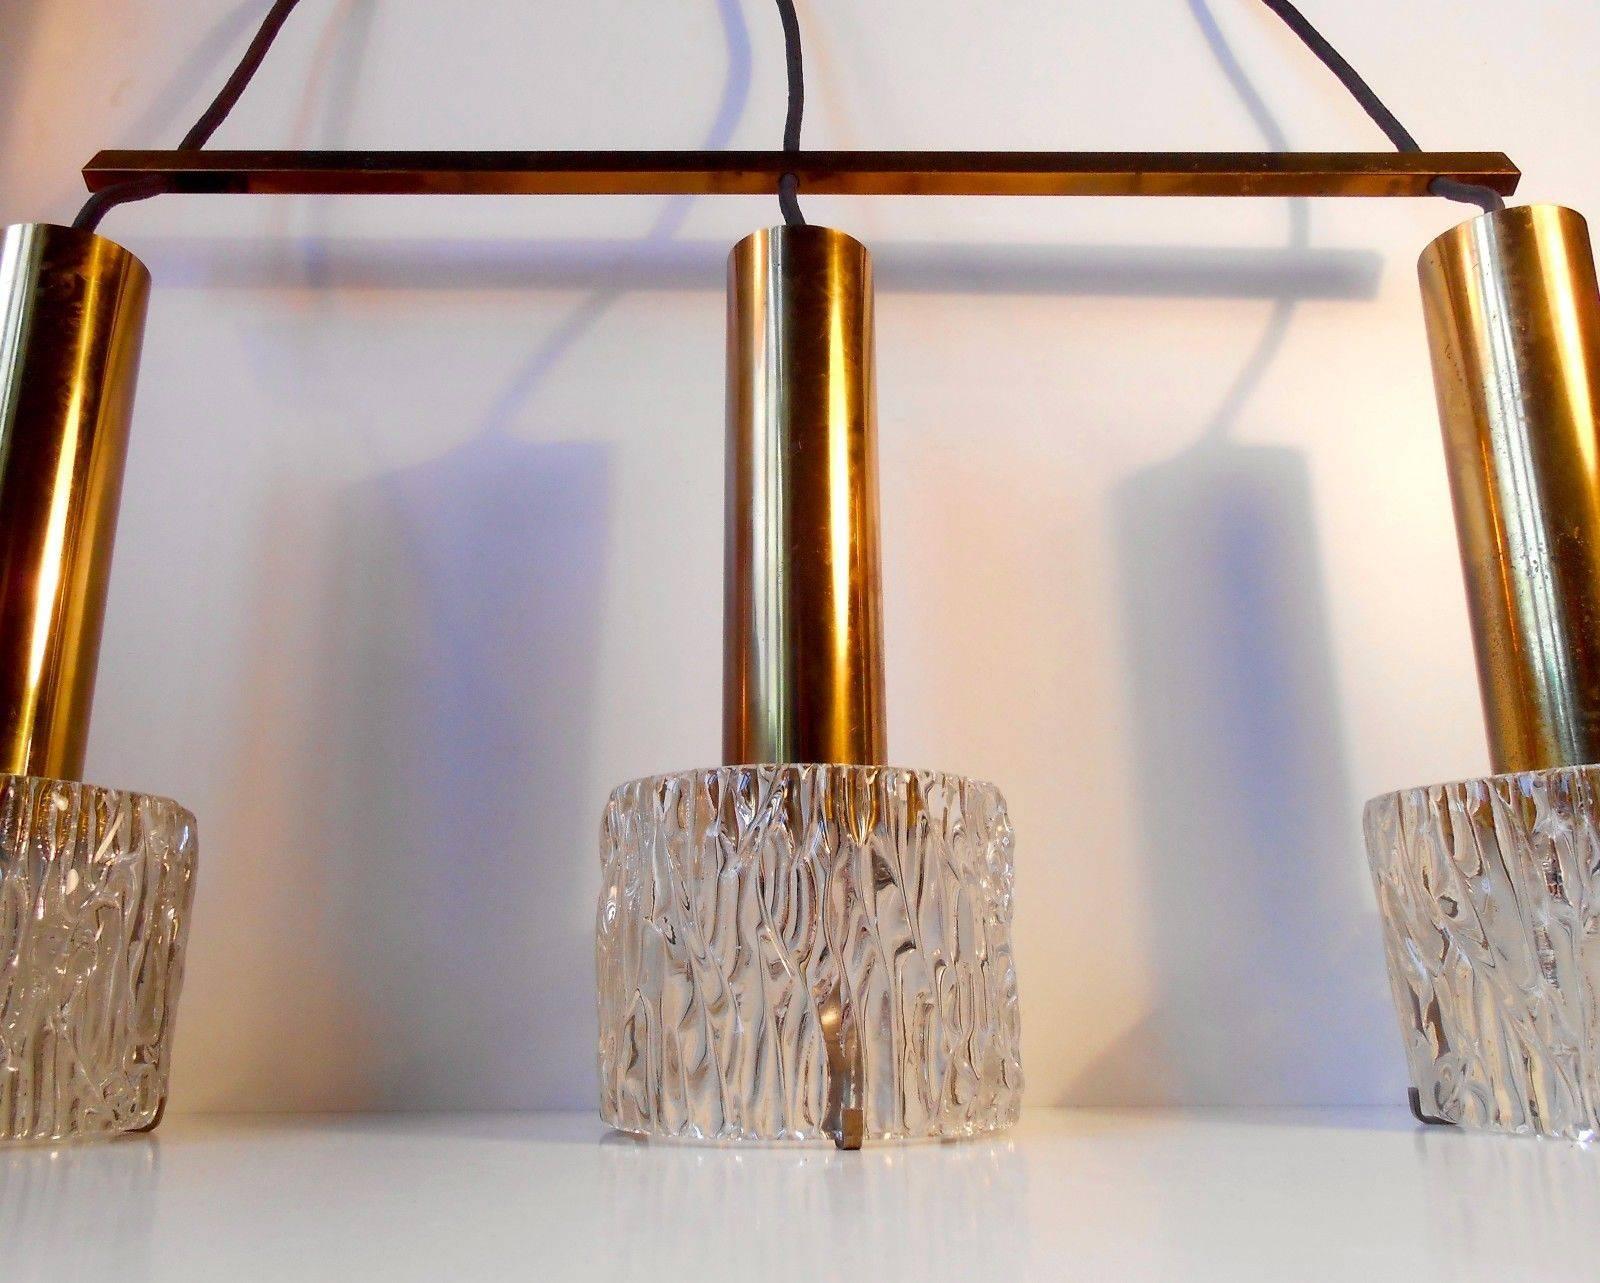 Three-shaded height adjustable ceiling light in solid patinated brass and heavy crystal glass. It was designed by Carl Fagerlund for Orrefors in Sweden during the 1950s. The light is in original, vintage and working condition. There will be